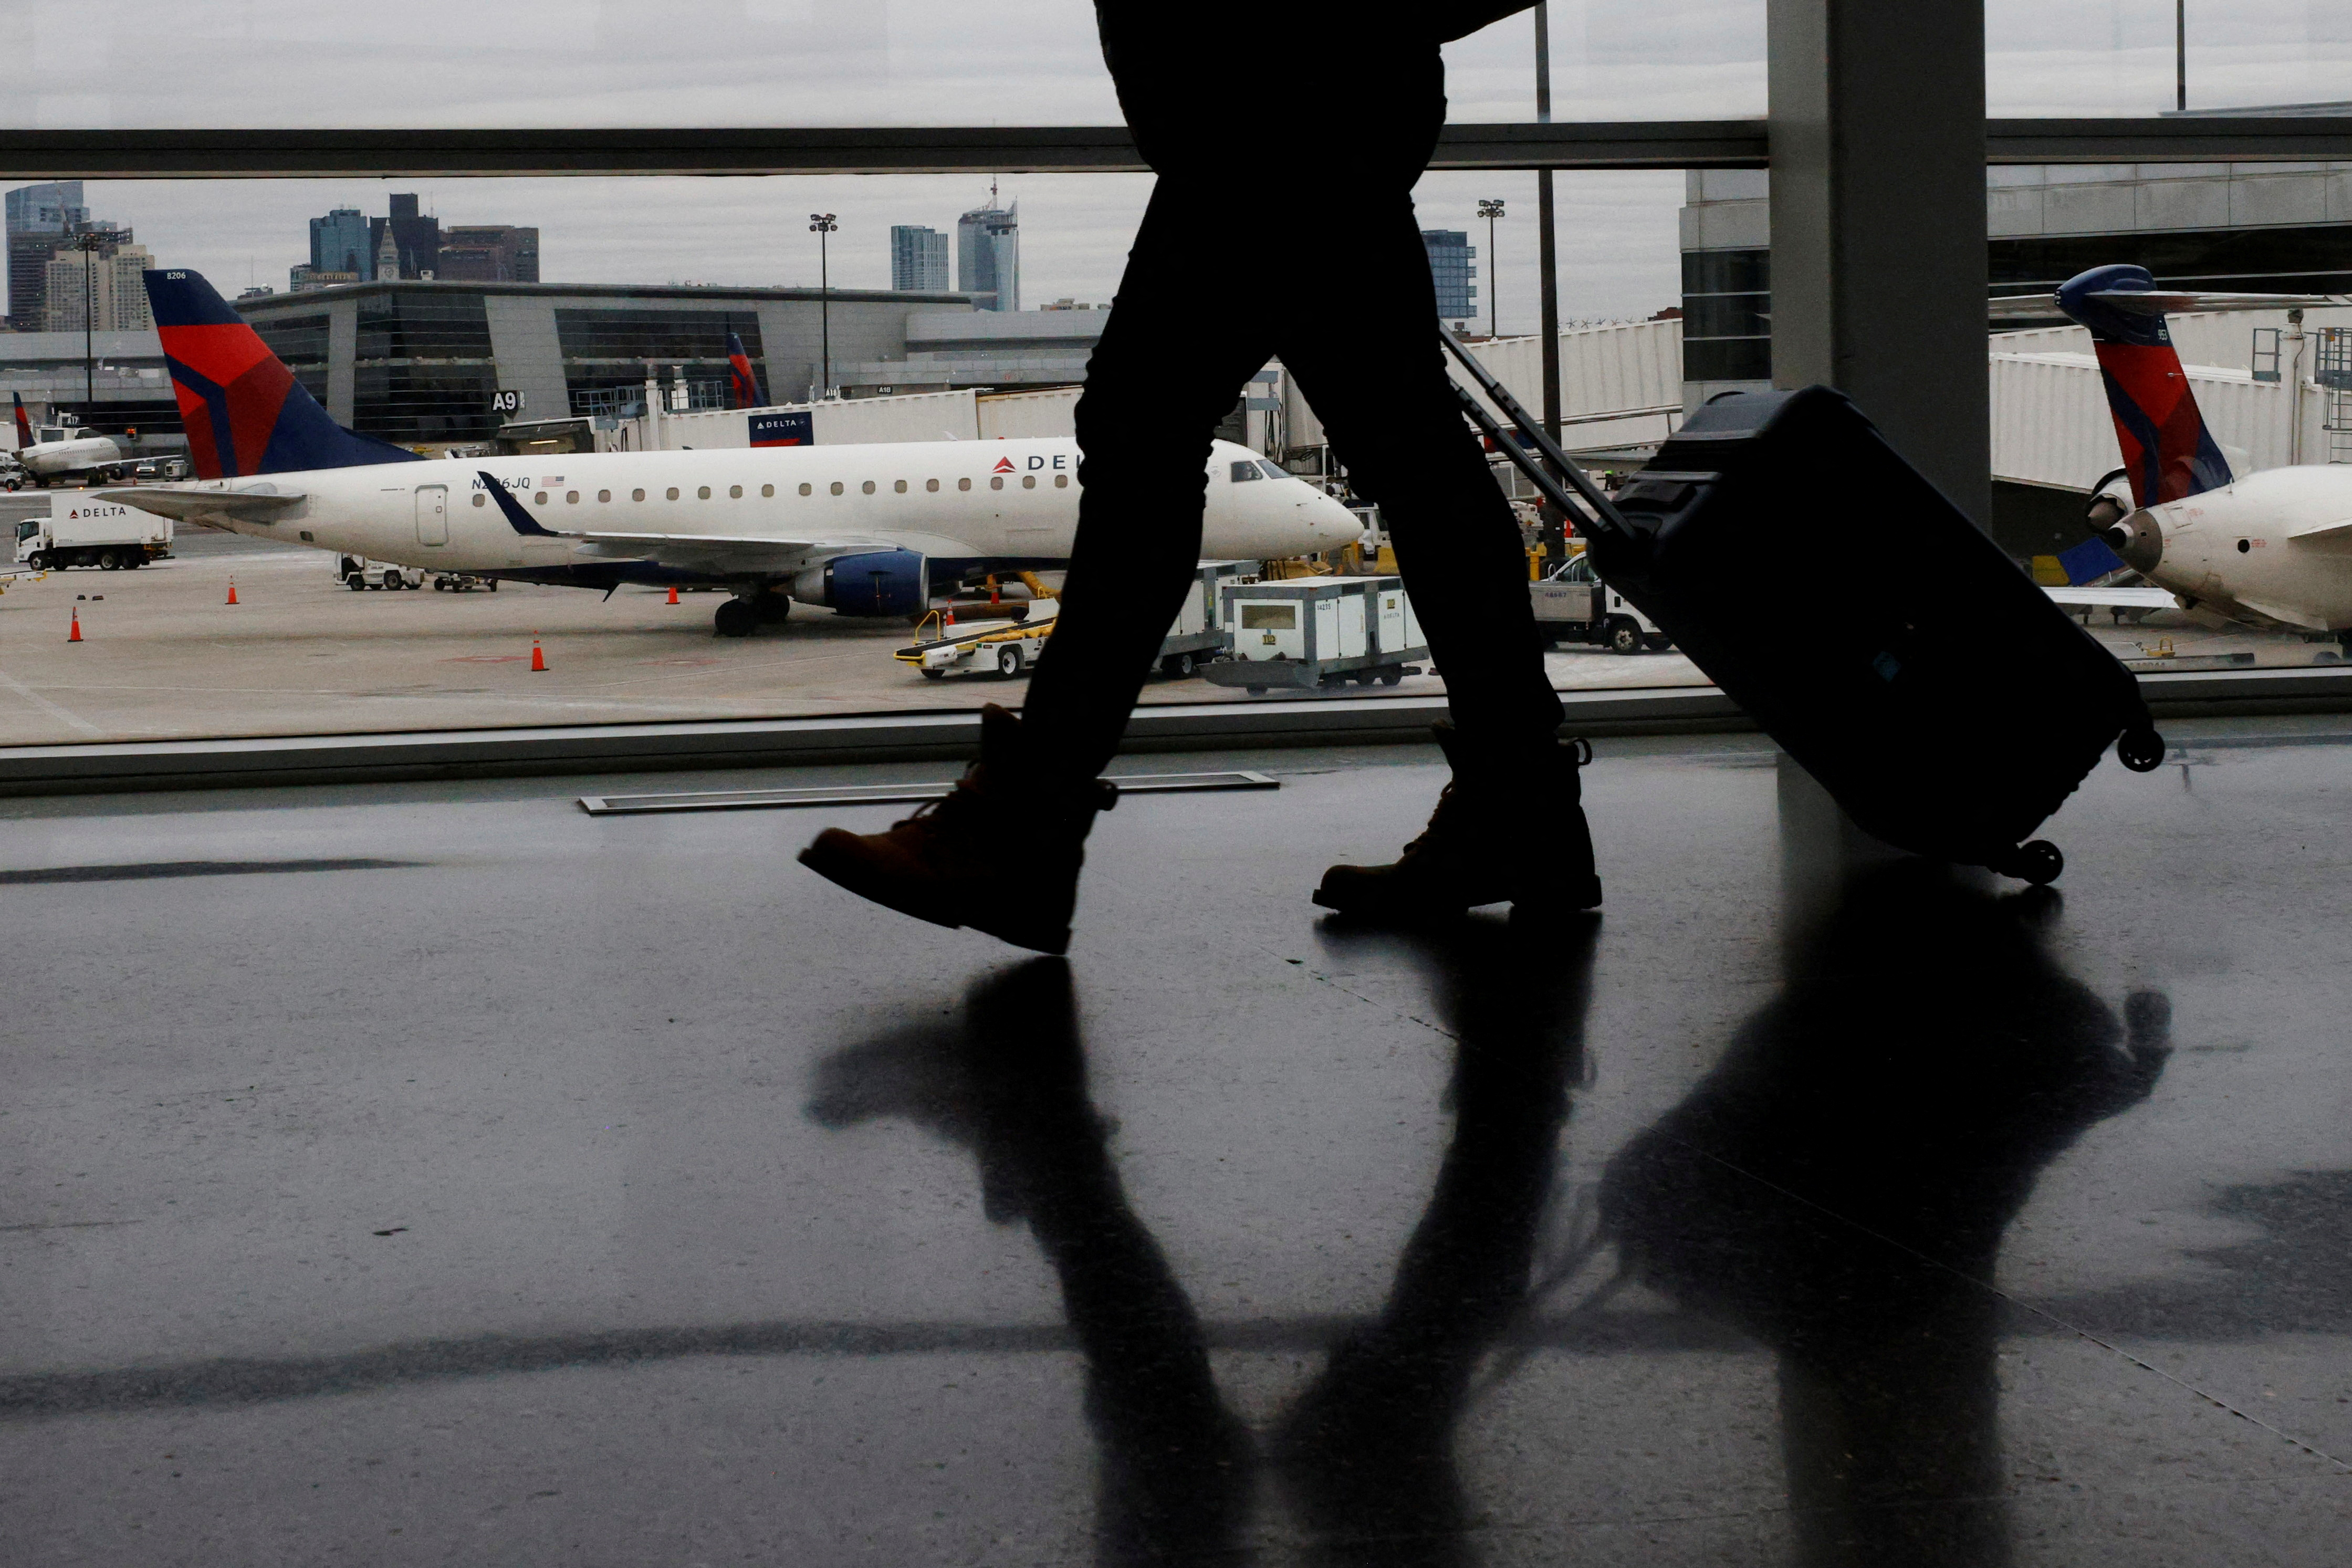 A passenger walks past a Delta Airlines plane at a gate at Logan International Airport in Boston